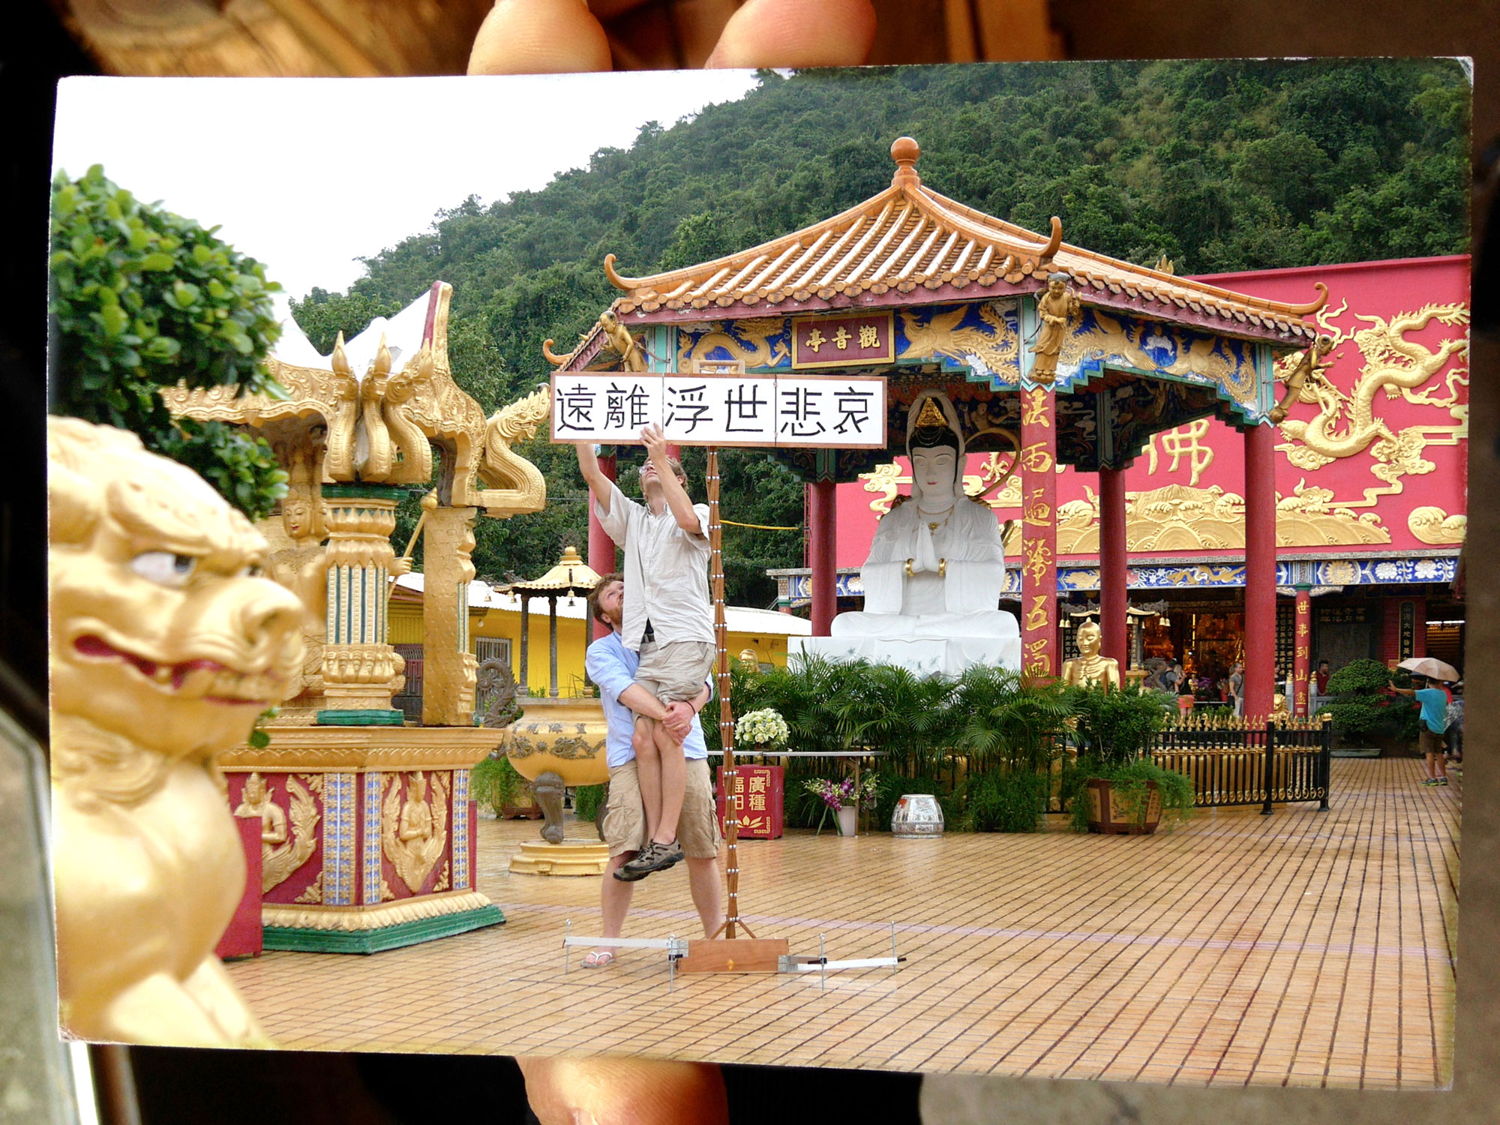 Frank&Robbert Robbert&Frank, GO AWAY SORROW OF THE WORLD - Postcard front, Ten Thousand Buddhas Hong Kong, 2015, signed & stamped postcard, 14,8 × 10,5 cm, courtesy F&R R&F